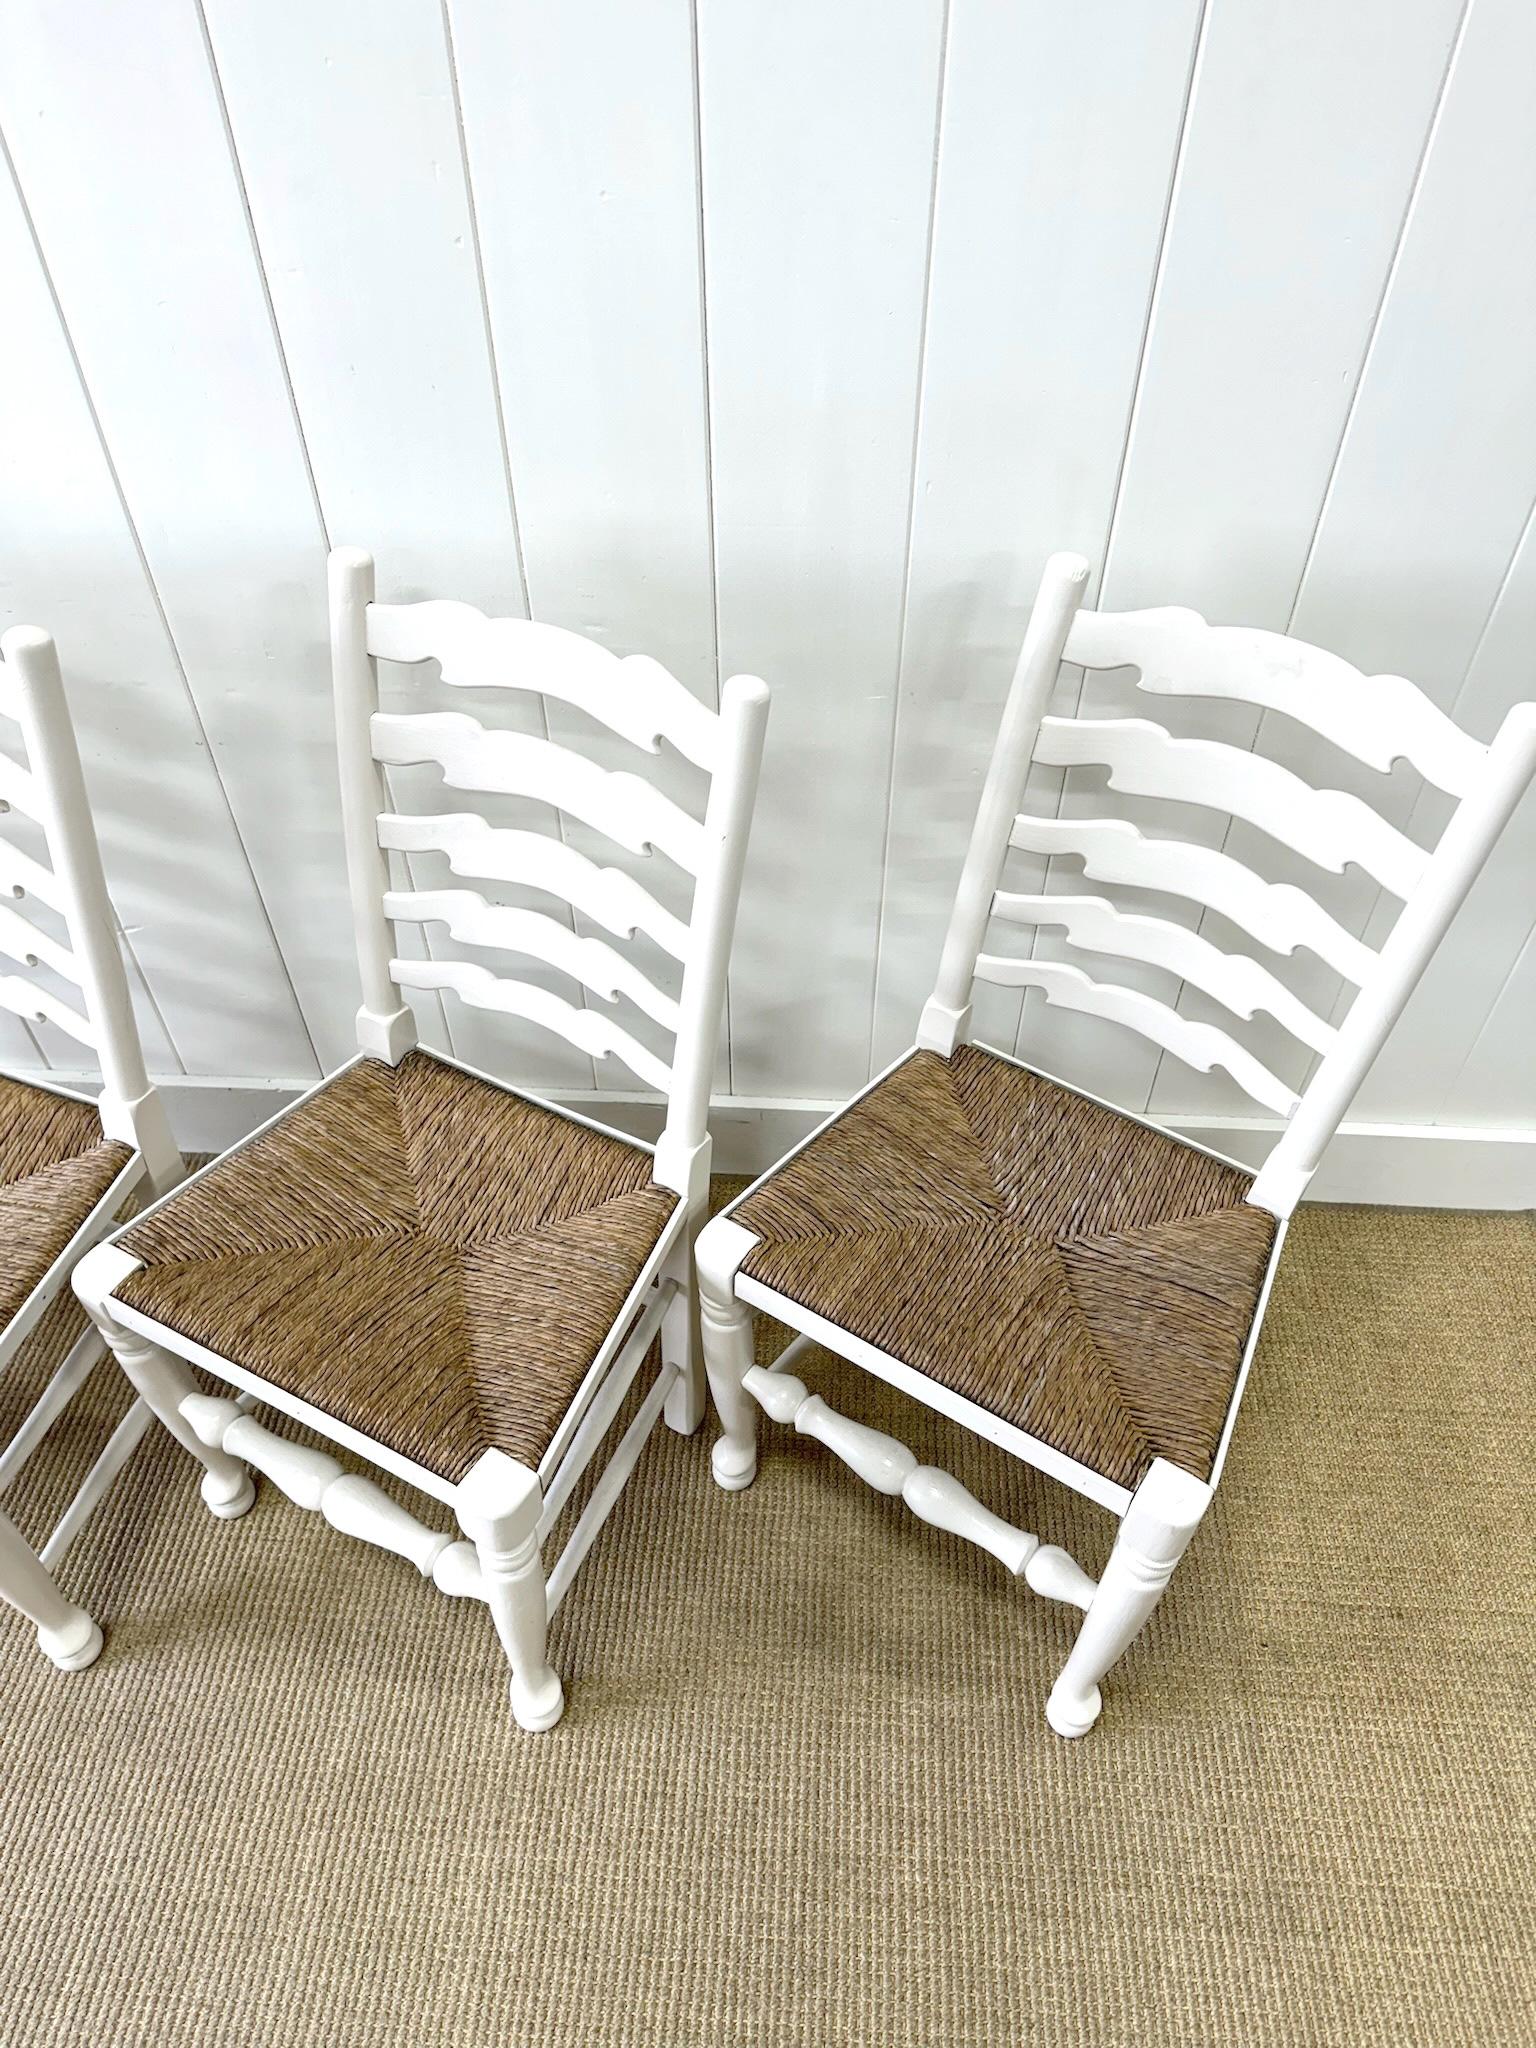 British A Set of 4 Ladderback Rush Seat Chairs Painted White For Sale